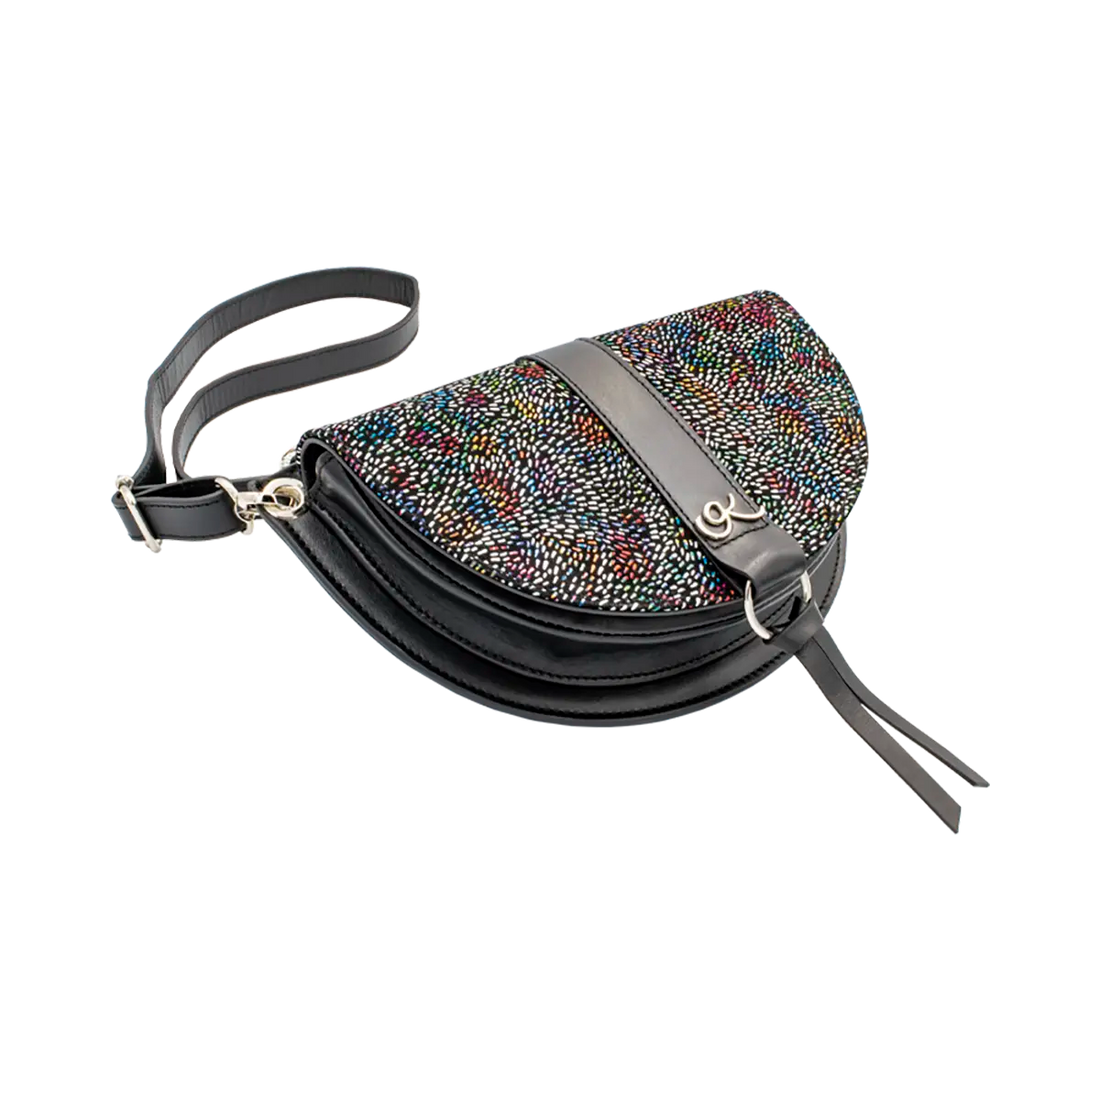 black multi stripe print leather crossbody bag and fanny pack. Accessory for women in San Diego, CA.